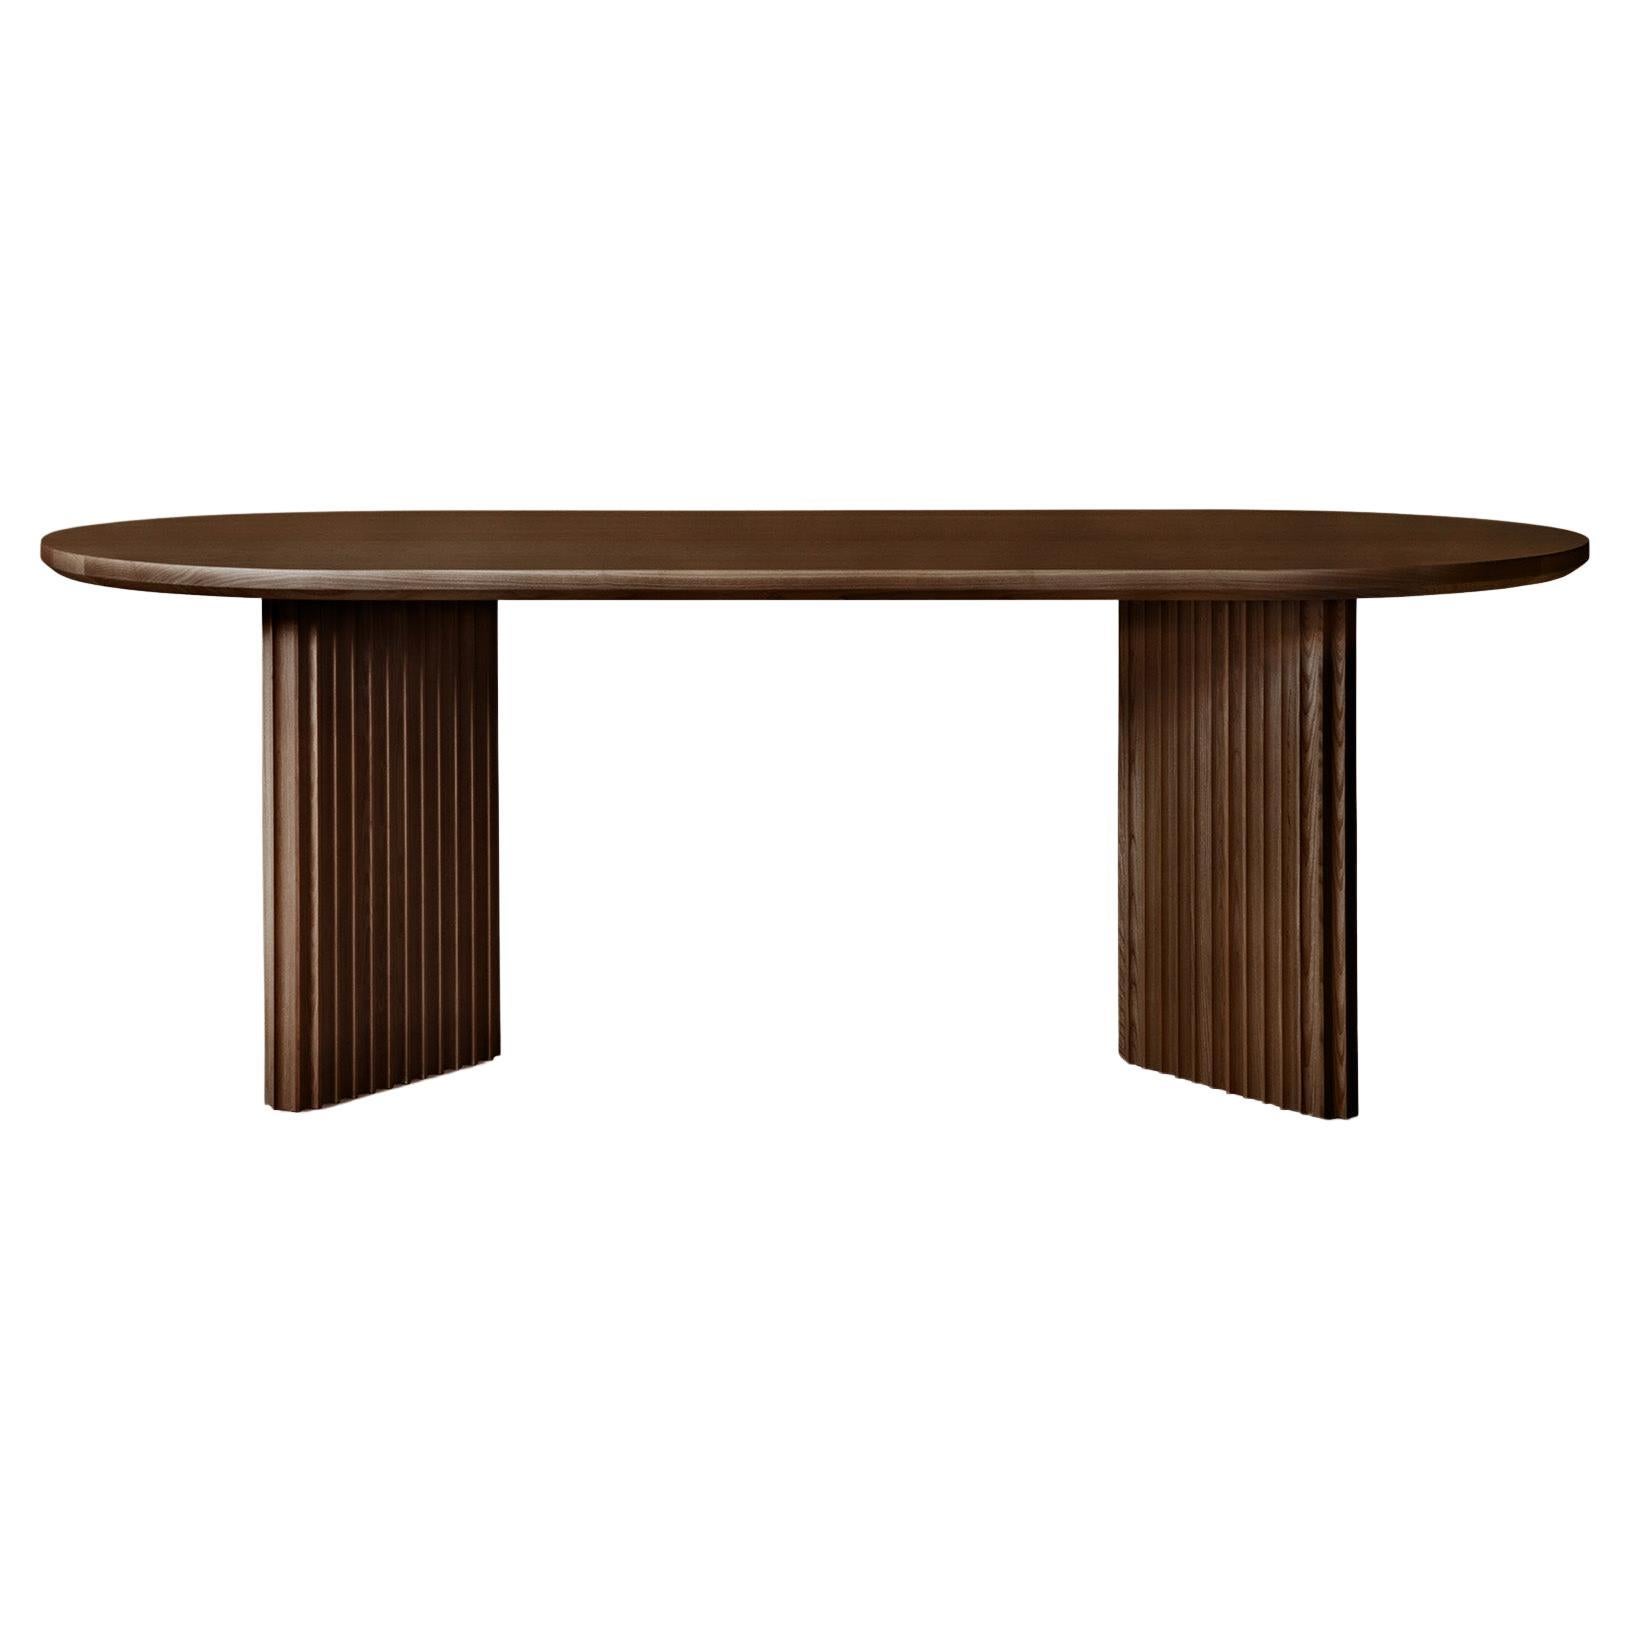 Basalto Solid Wood Table, Ash in Hand-Made Brown Finish, Contemporary